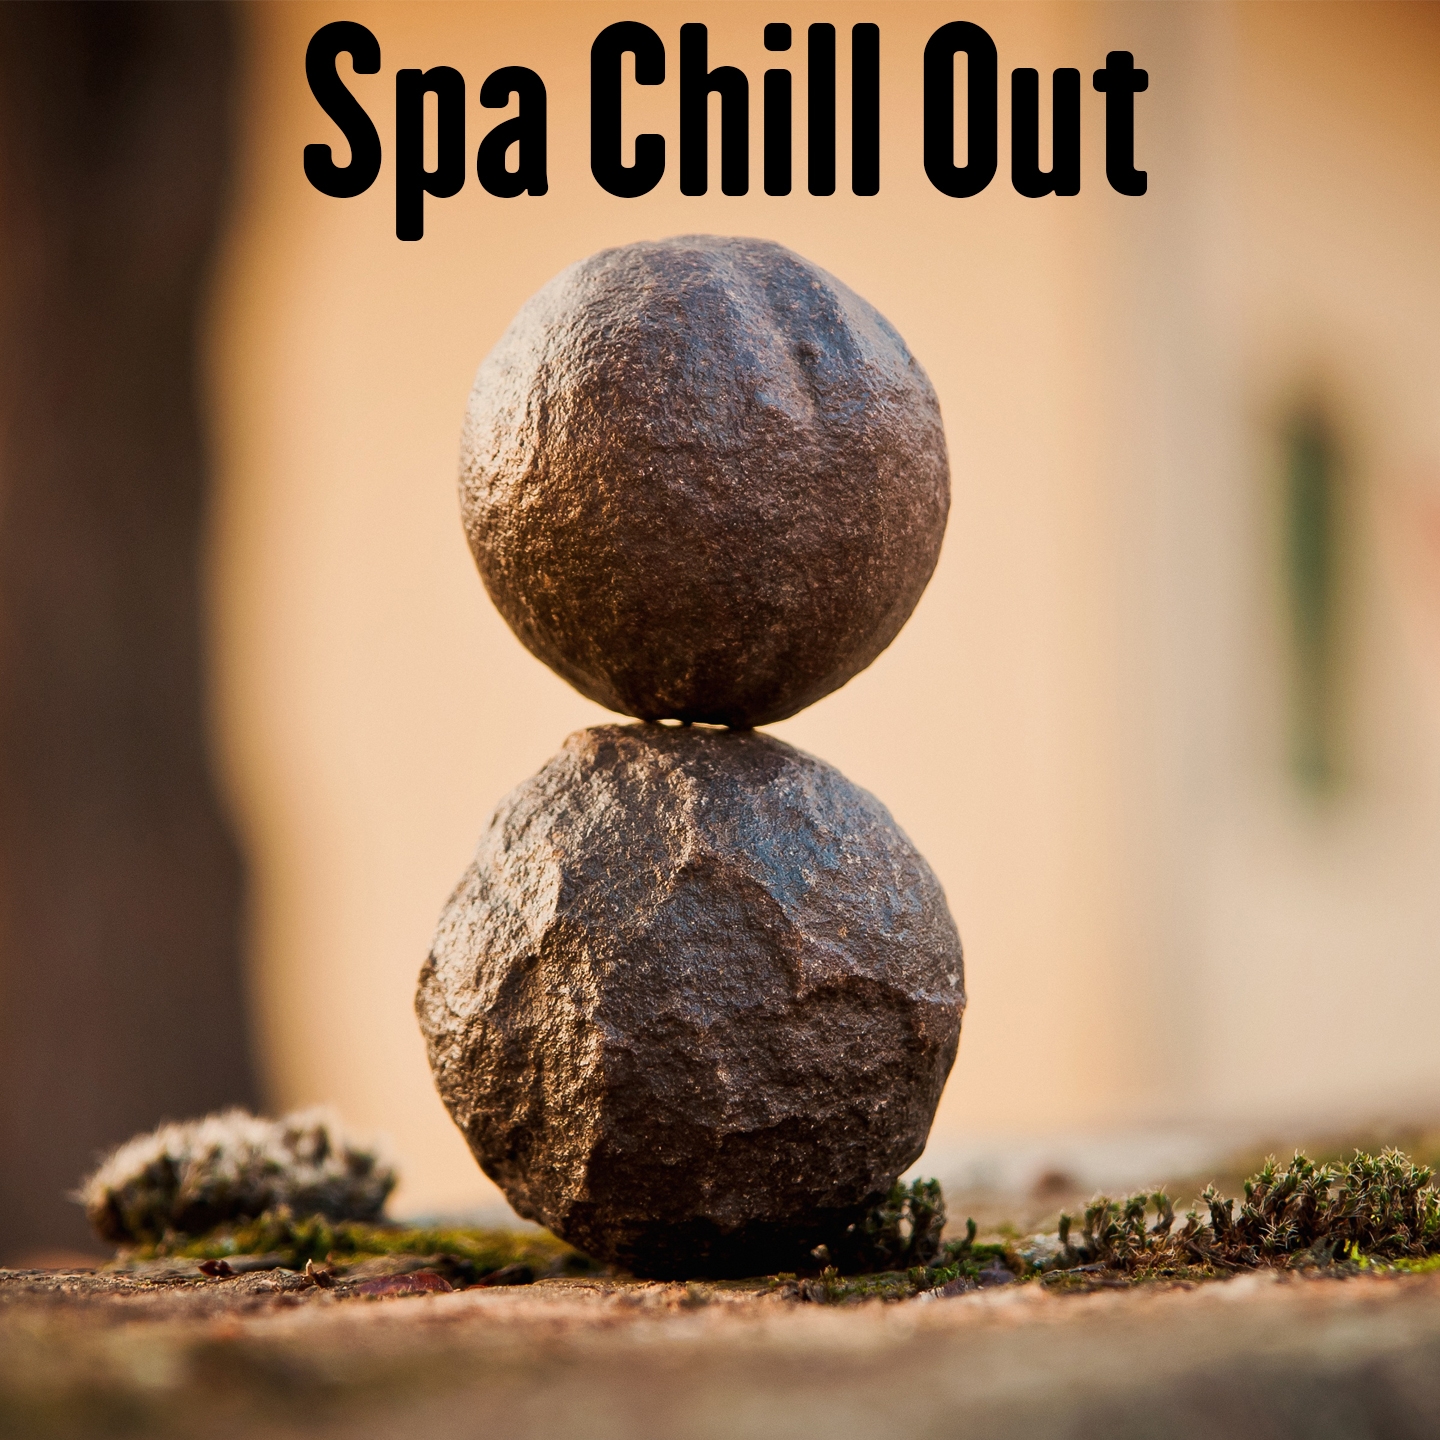 Spa Chill Out